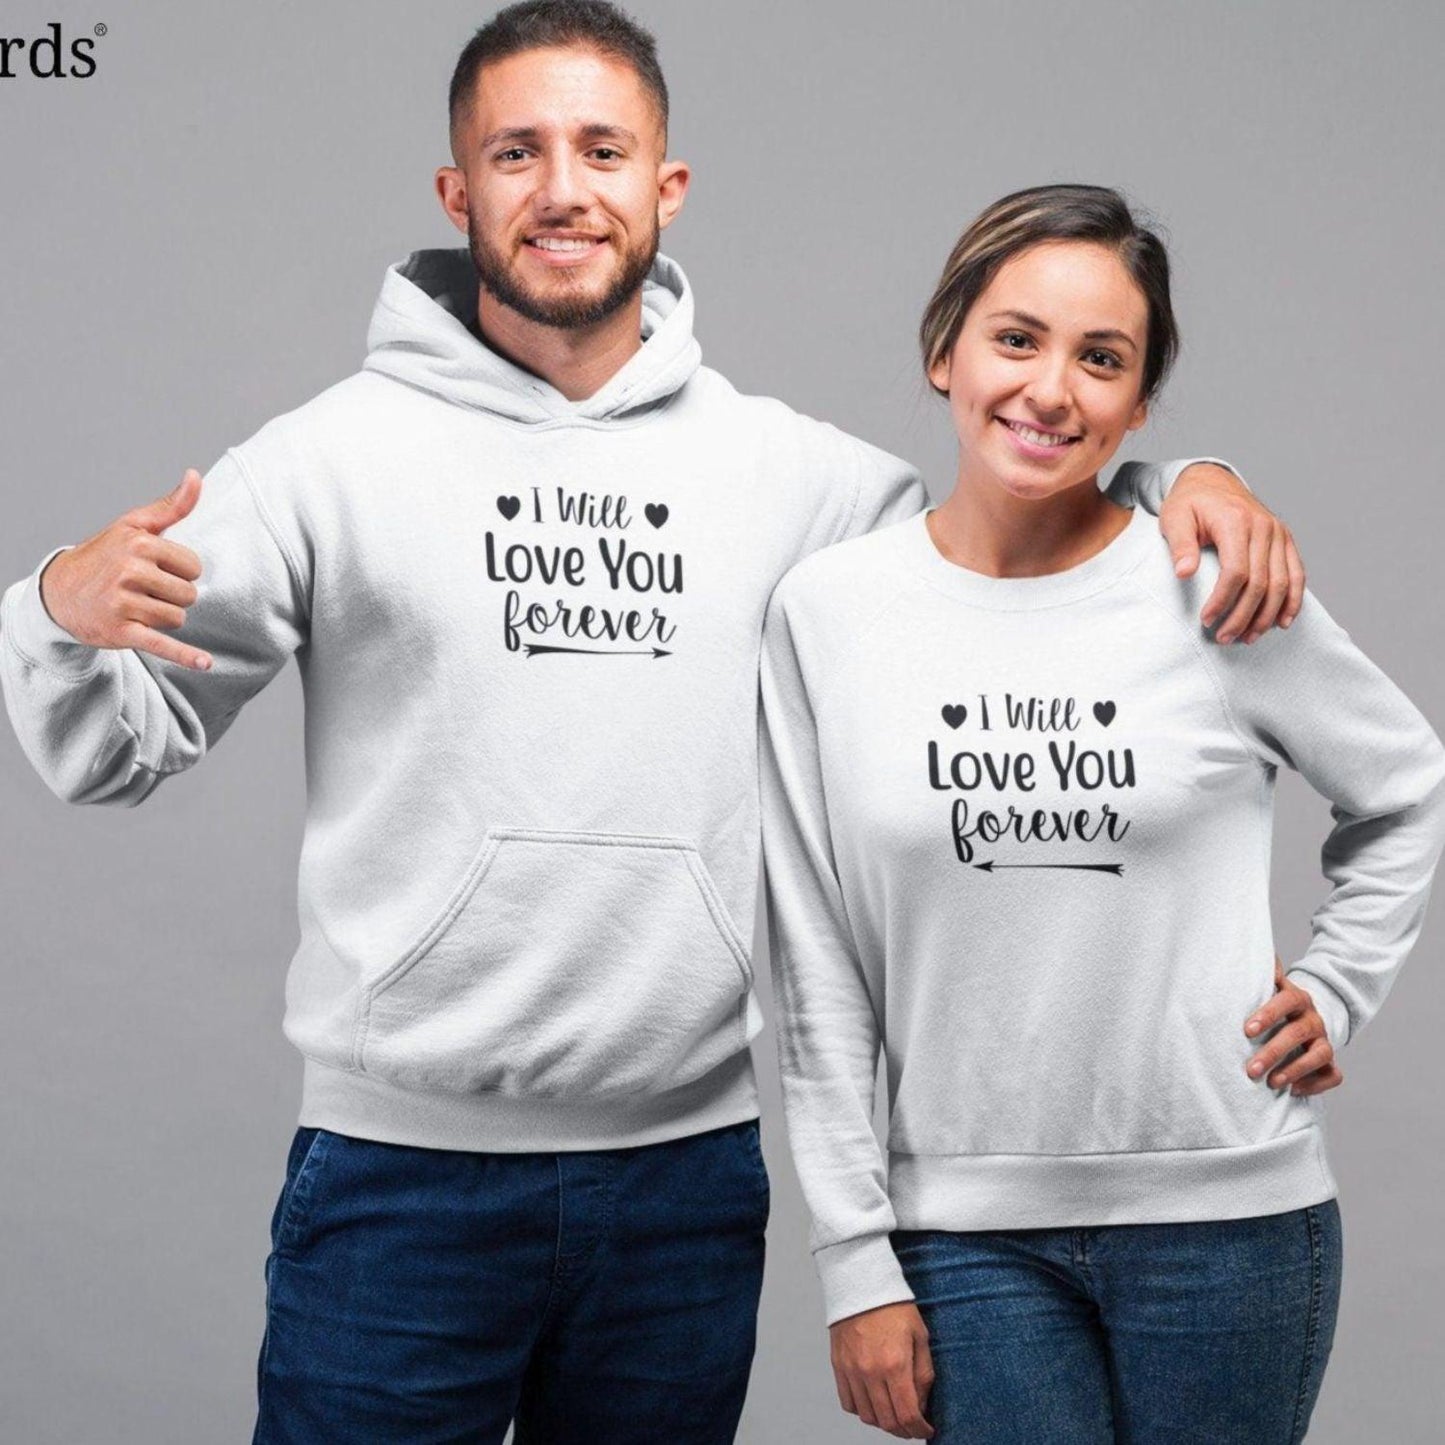 Matching Set: 'I'll Love You Forever' Gift for Couple, Boyfriend/Girlfriend Outfit - 4Lovebirds